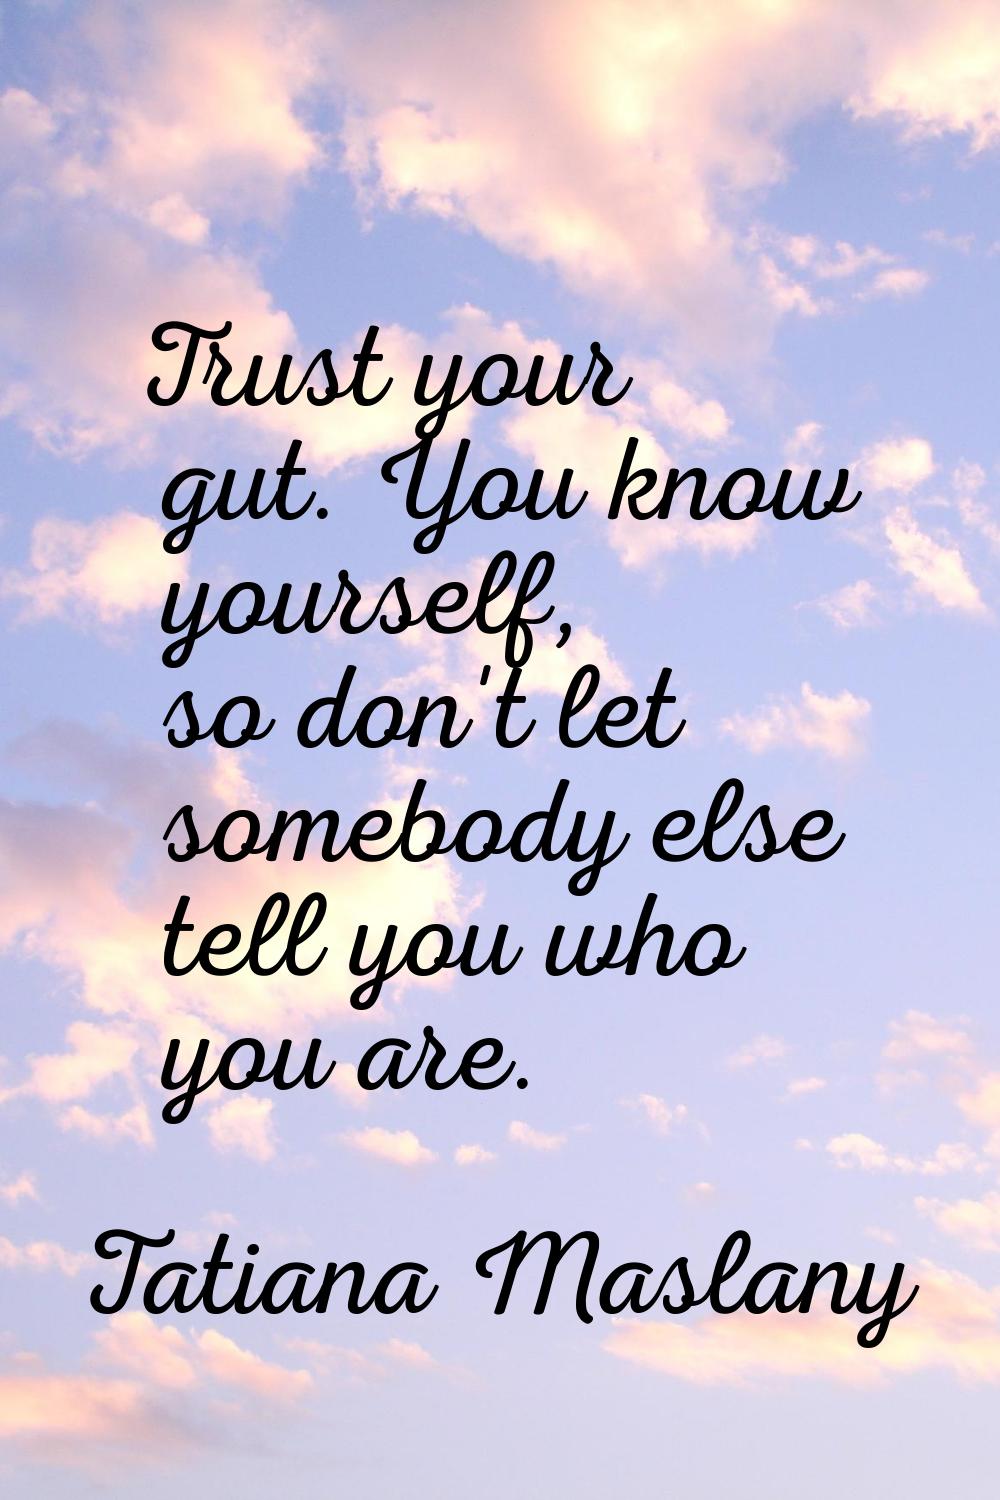 Trust your gut. You know yourself, so don't let somebody else tell you who you are.